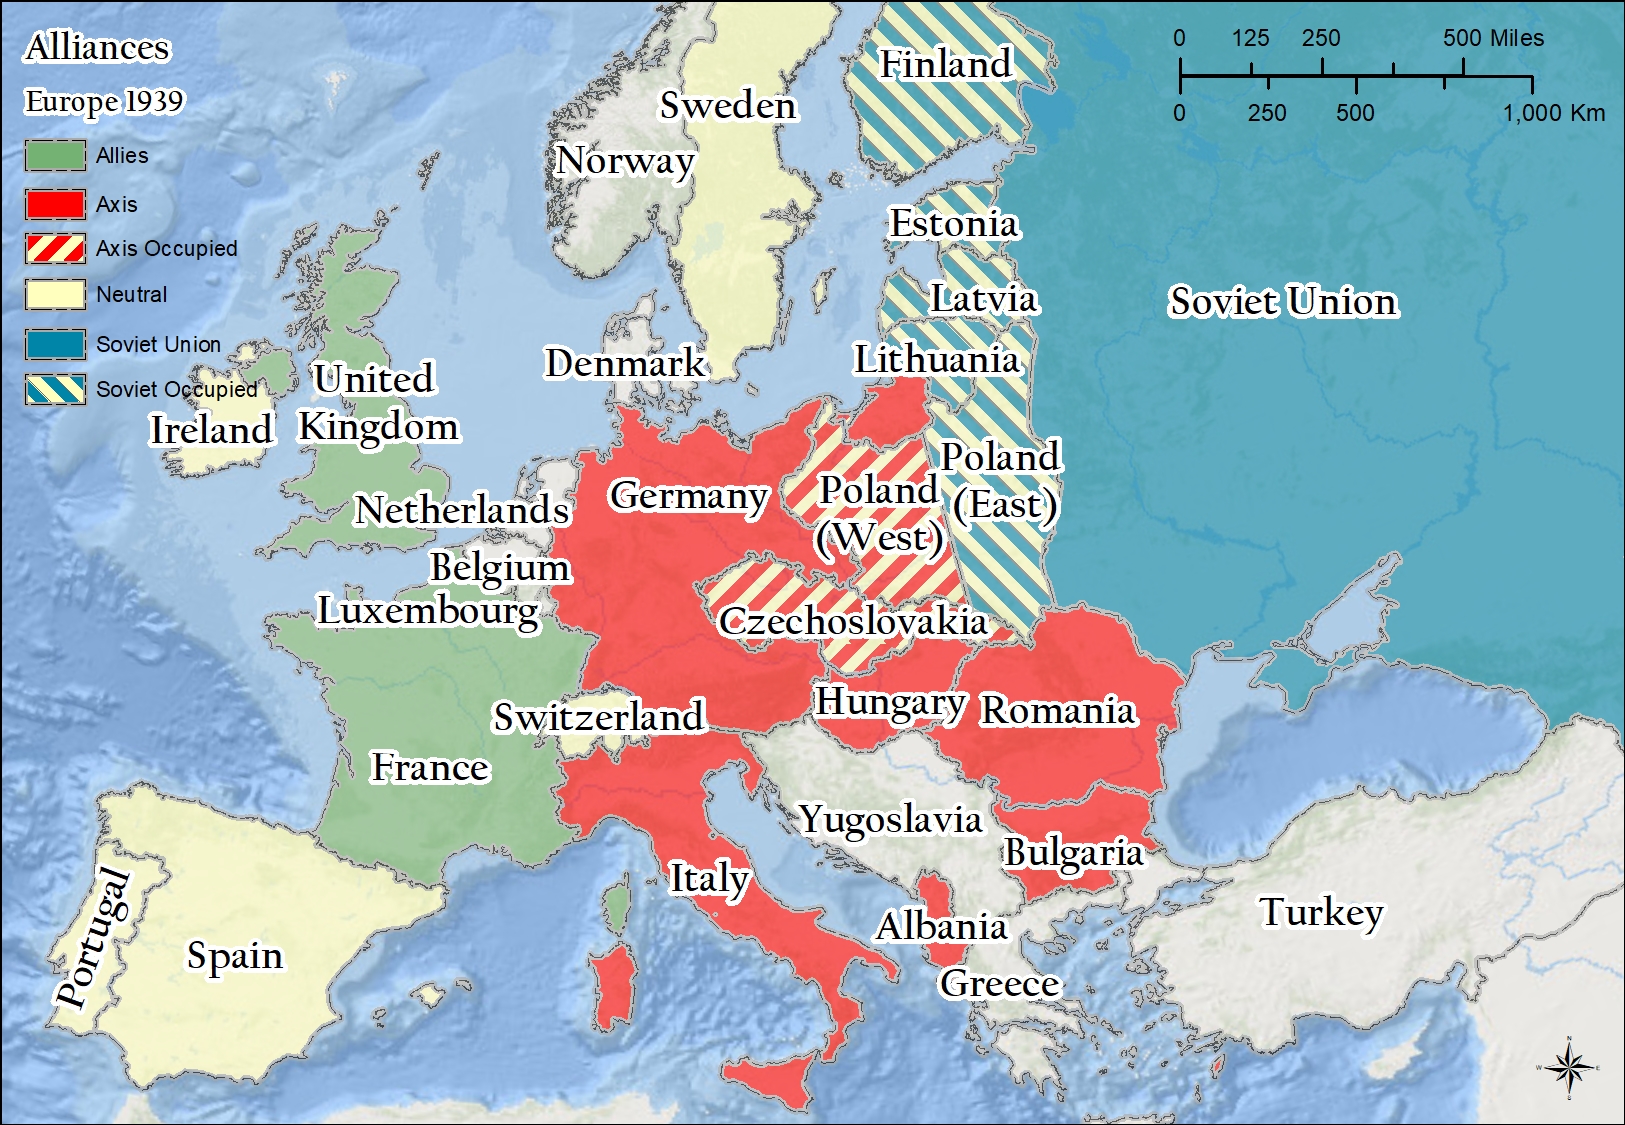 World War 2 Europe Map With Capitals